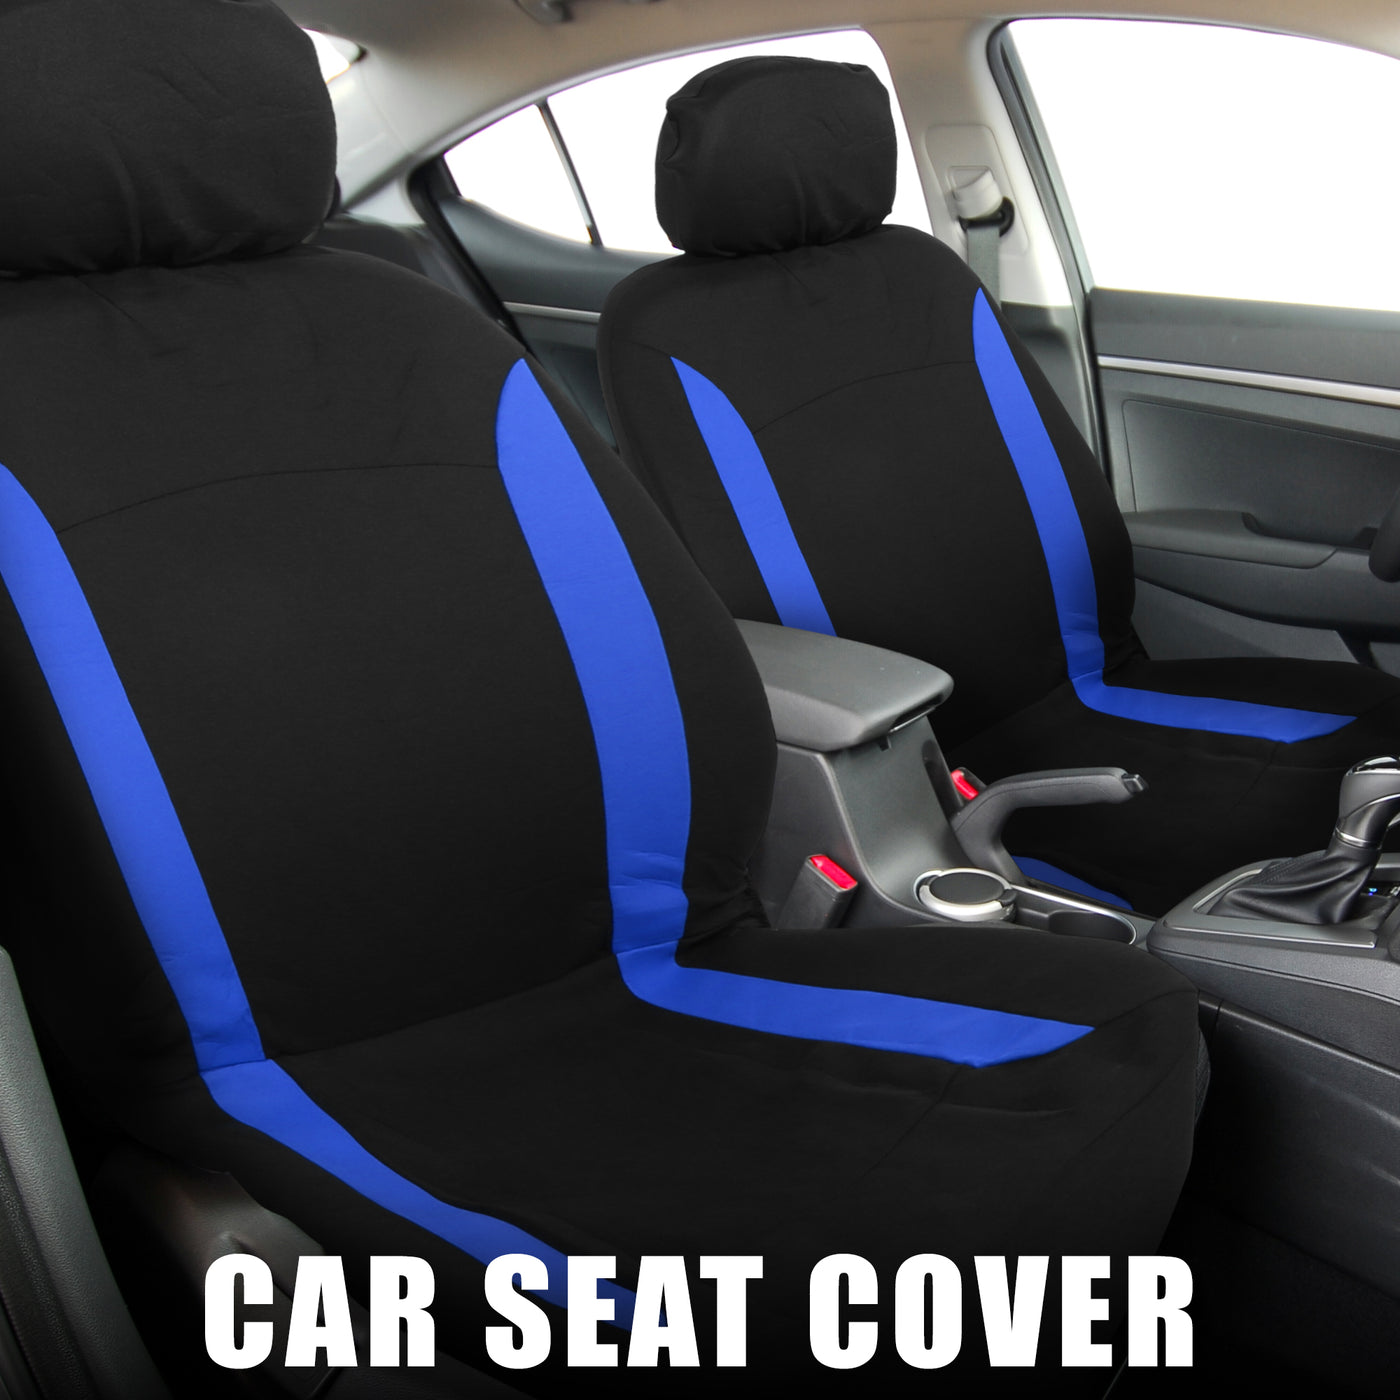 X AUTOHAUX 4pcs Universal Interior Car Seat Covers Head Rest Cover Washable Flat Padding Polyester Sponge Car Seat Covers Fit for Cars Trucks and SUVs